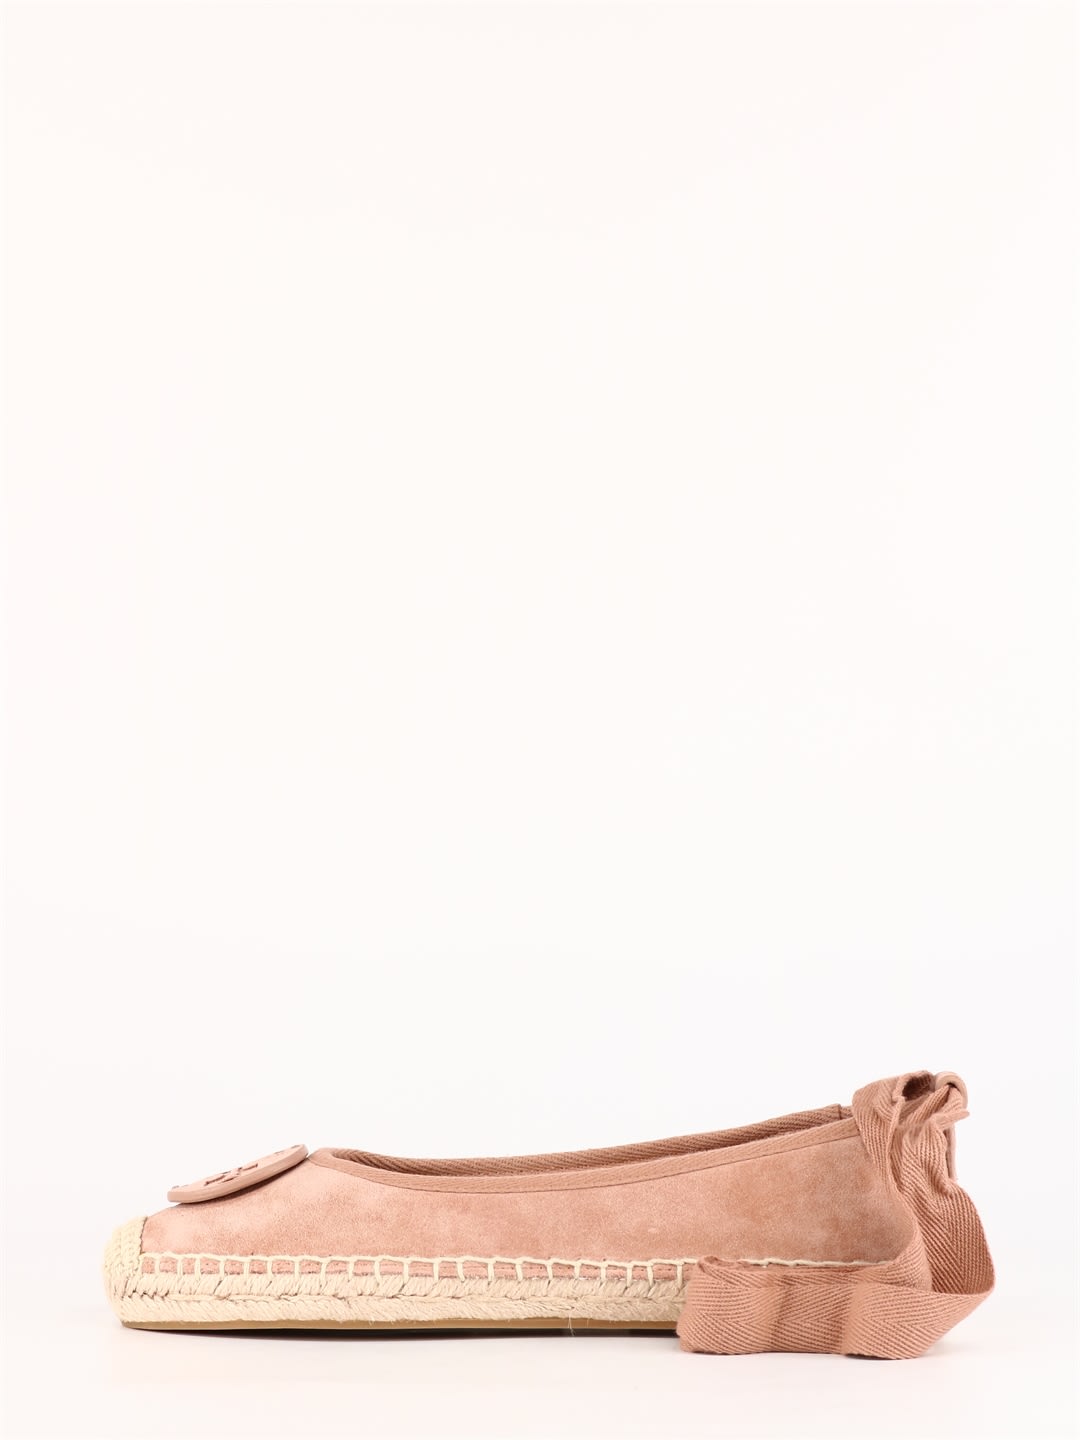 Buy Tory Burch Minnie Ballet Espadrillas Pink online, shop Tory Burch shoes with free shipping